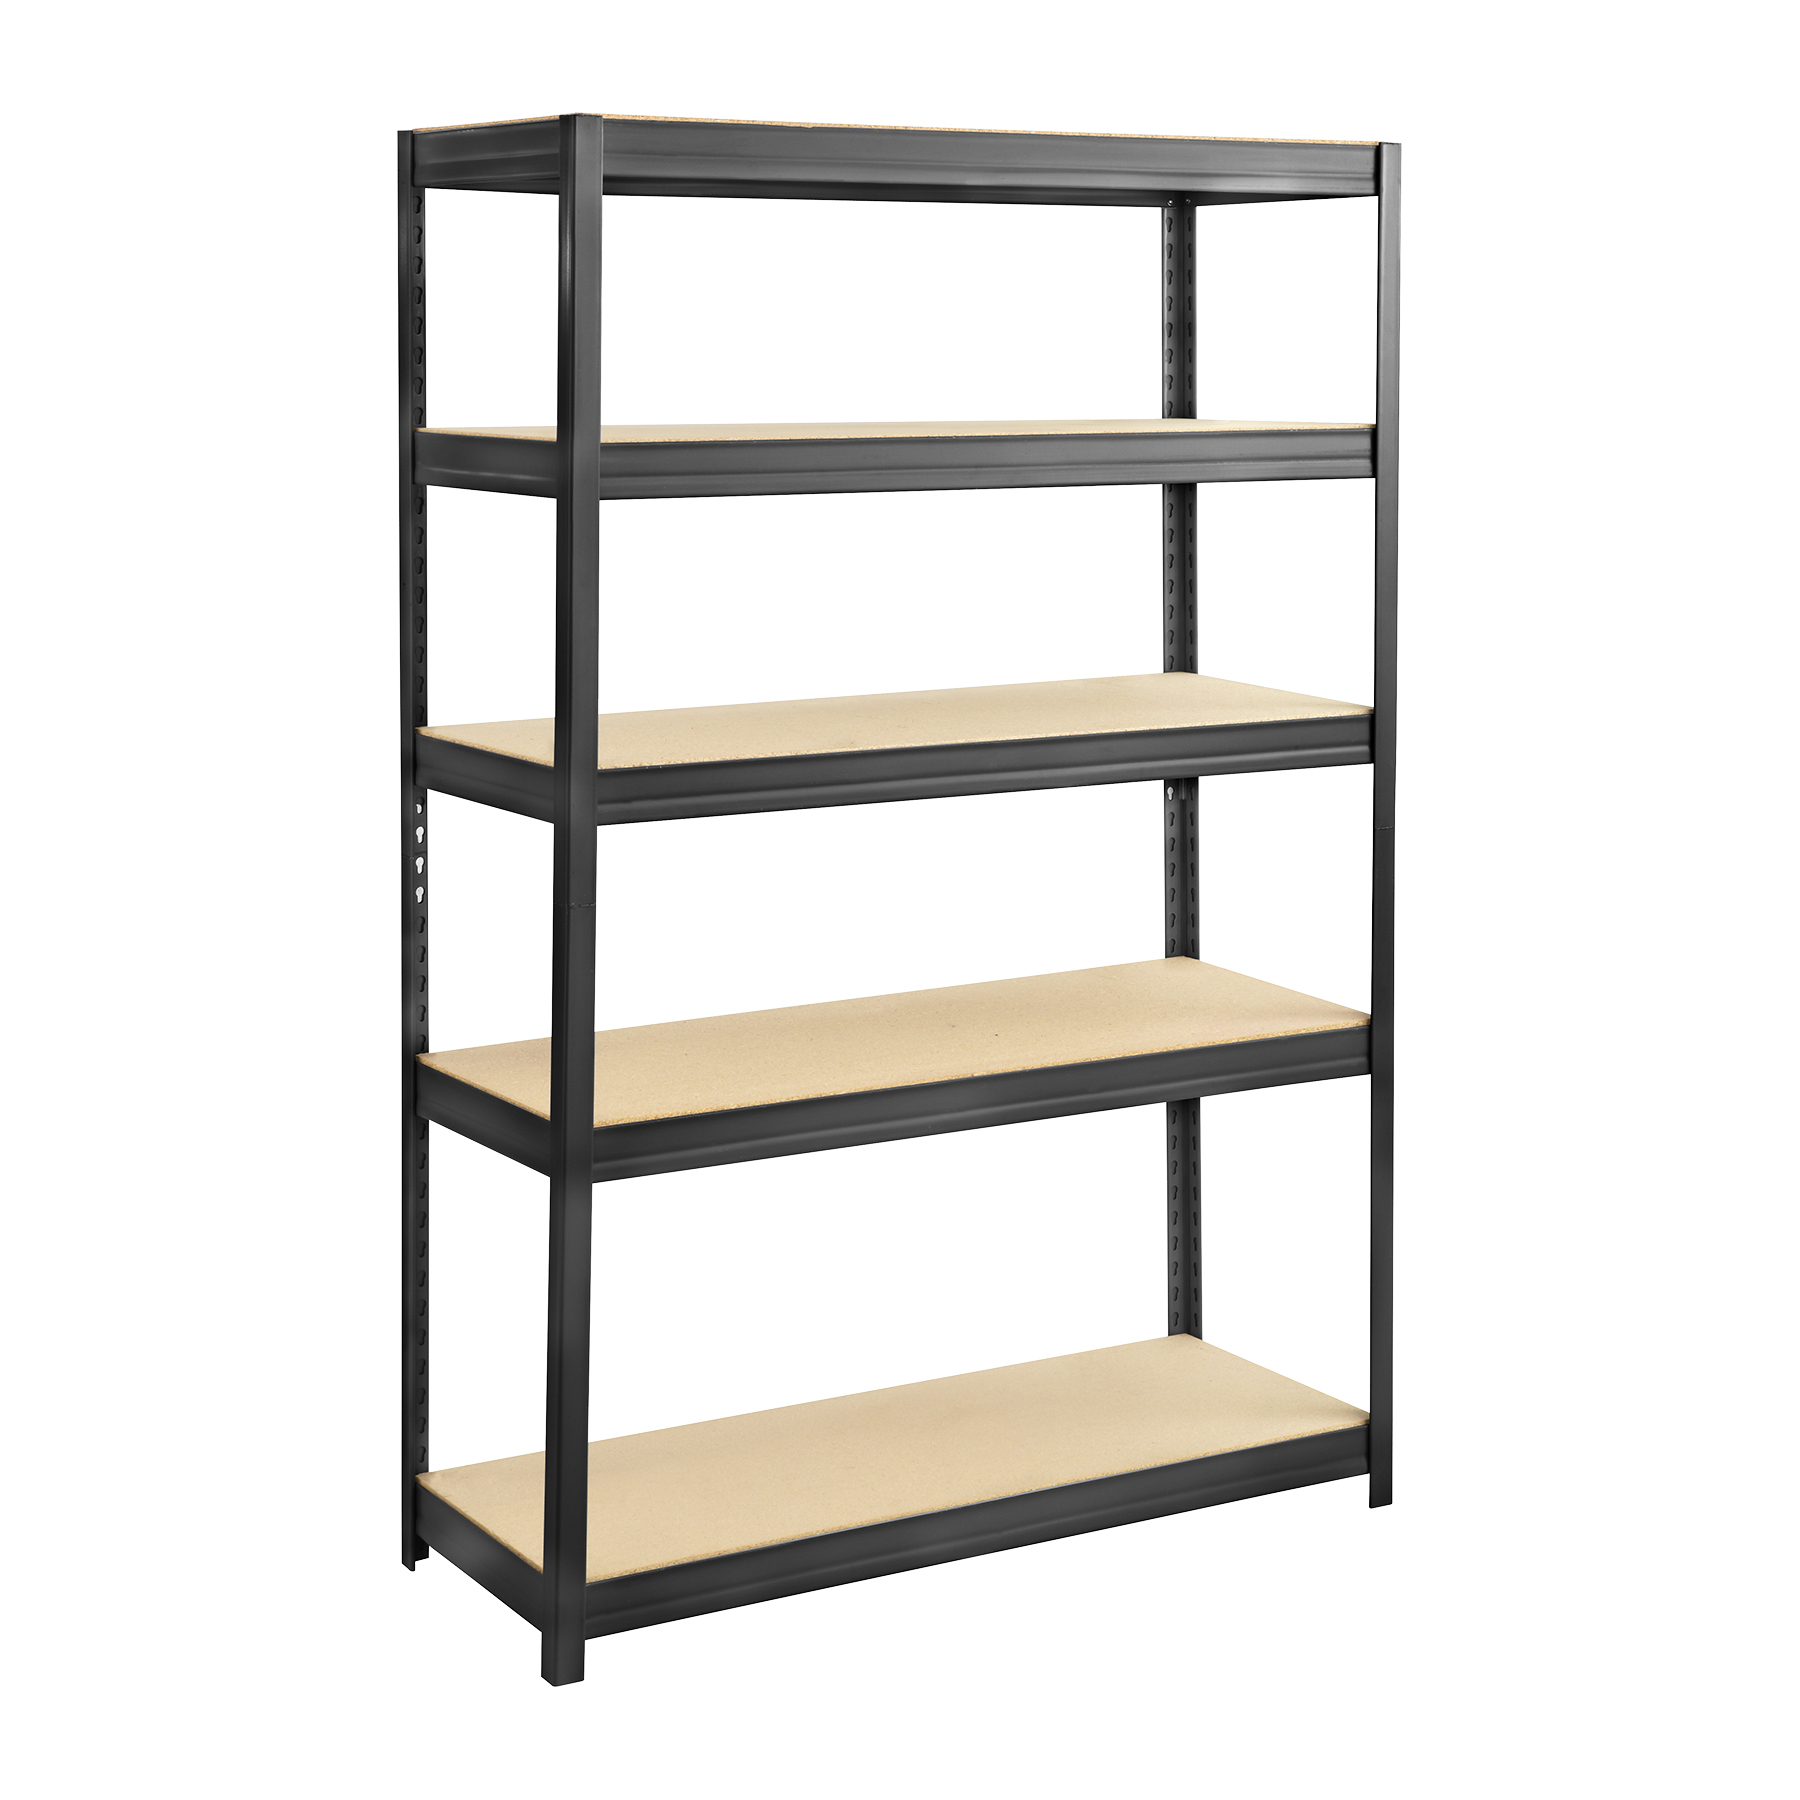 Particleboard Shelving 48x18, Safco Metal Shelving